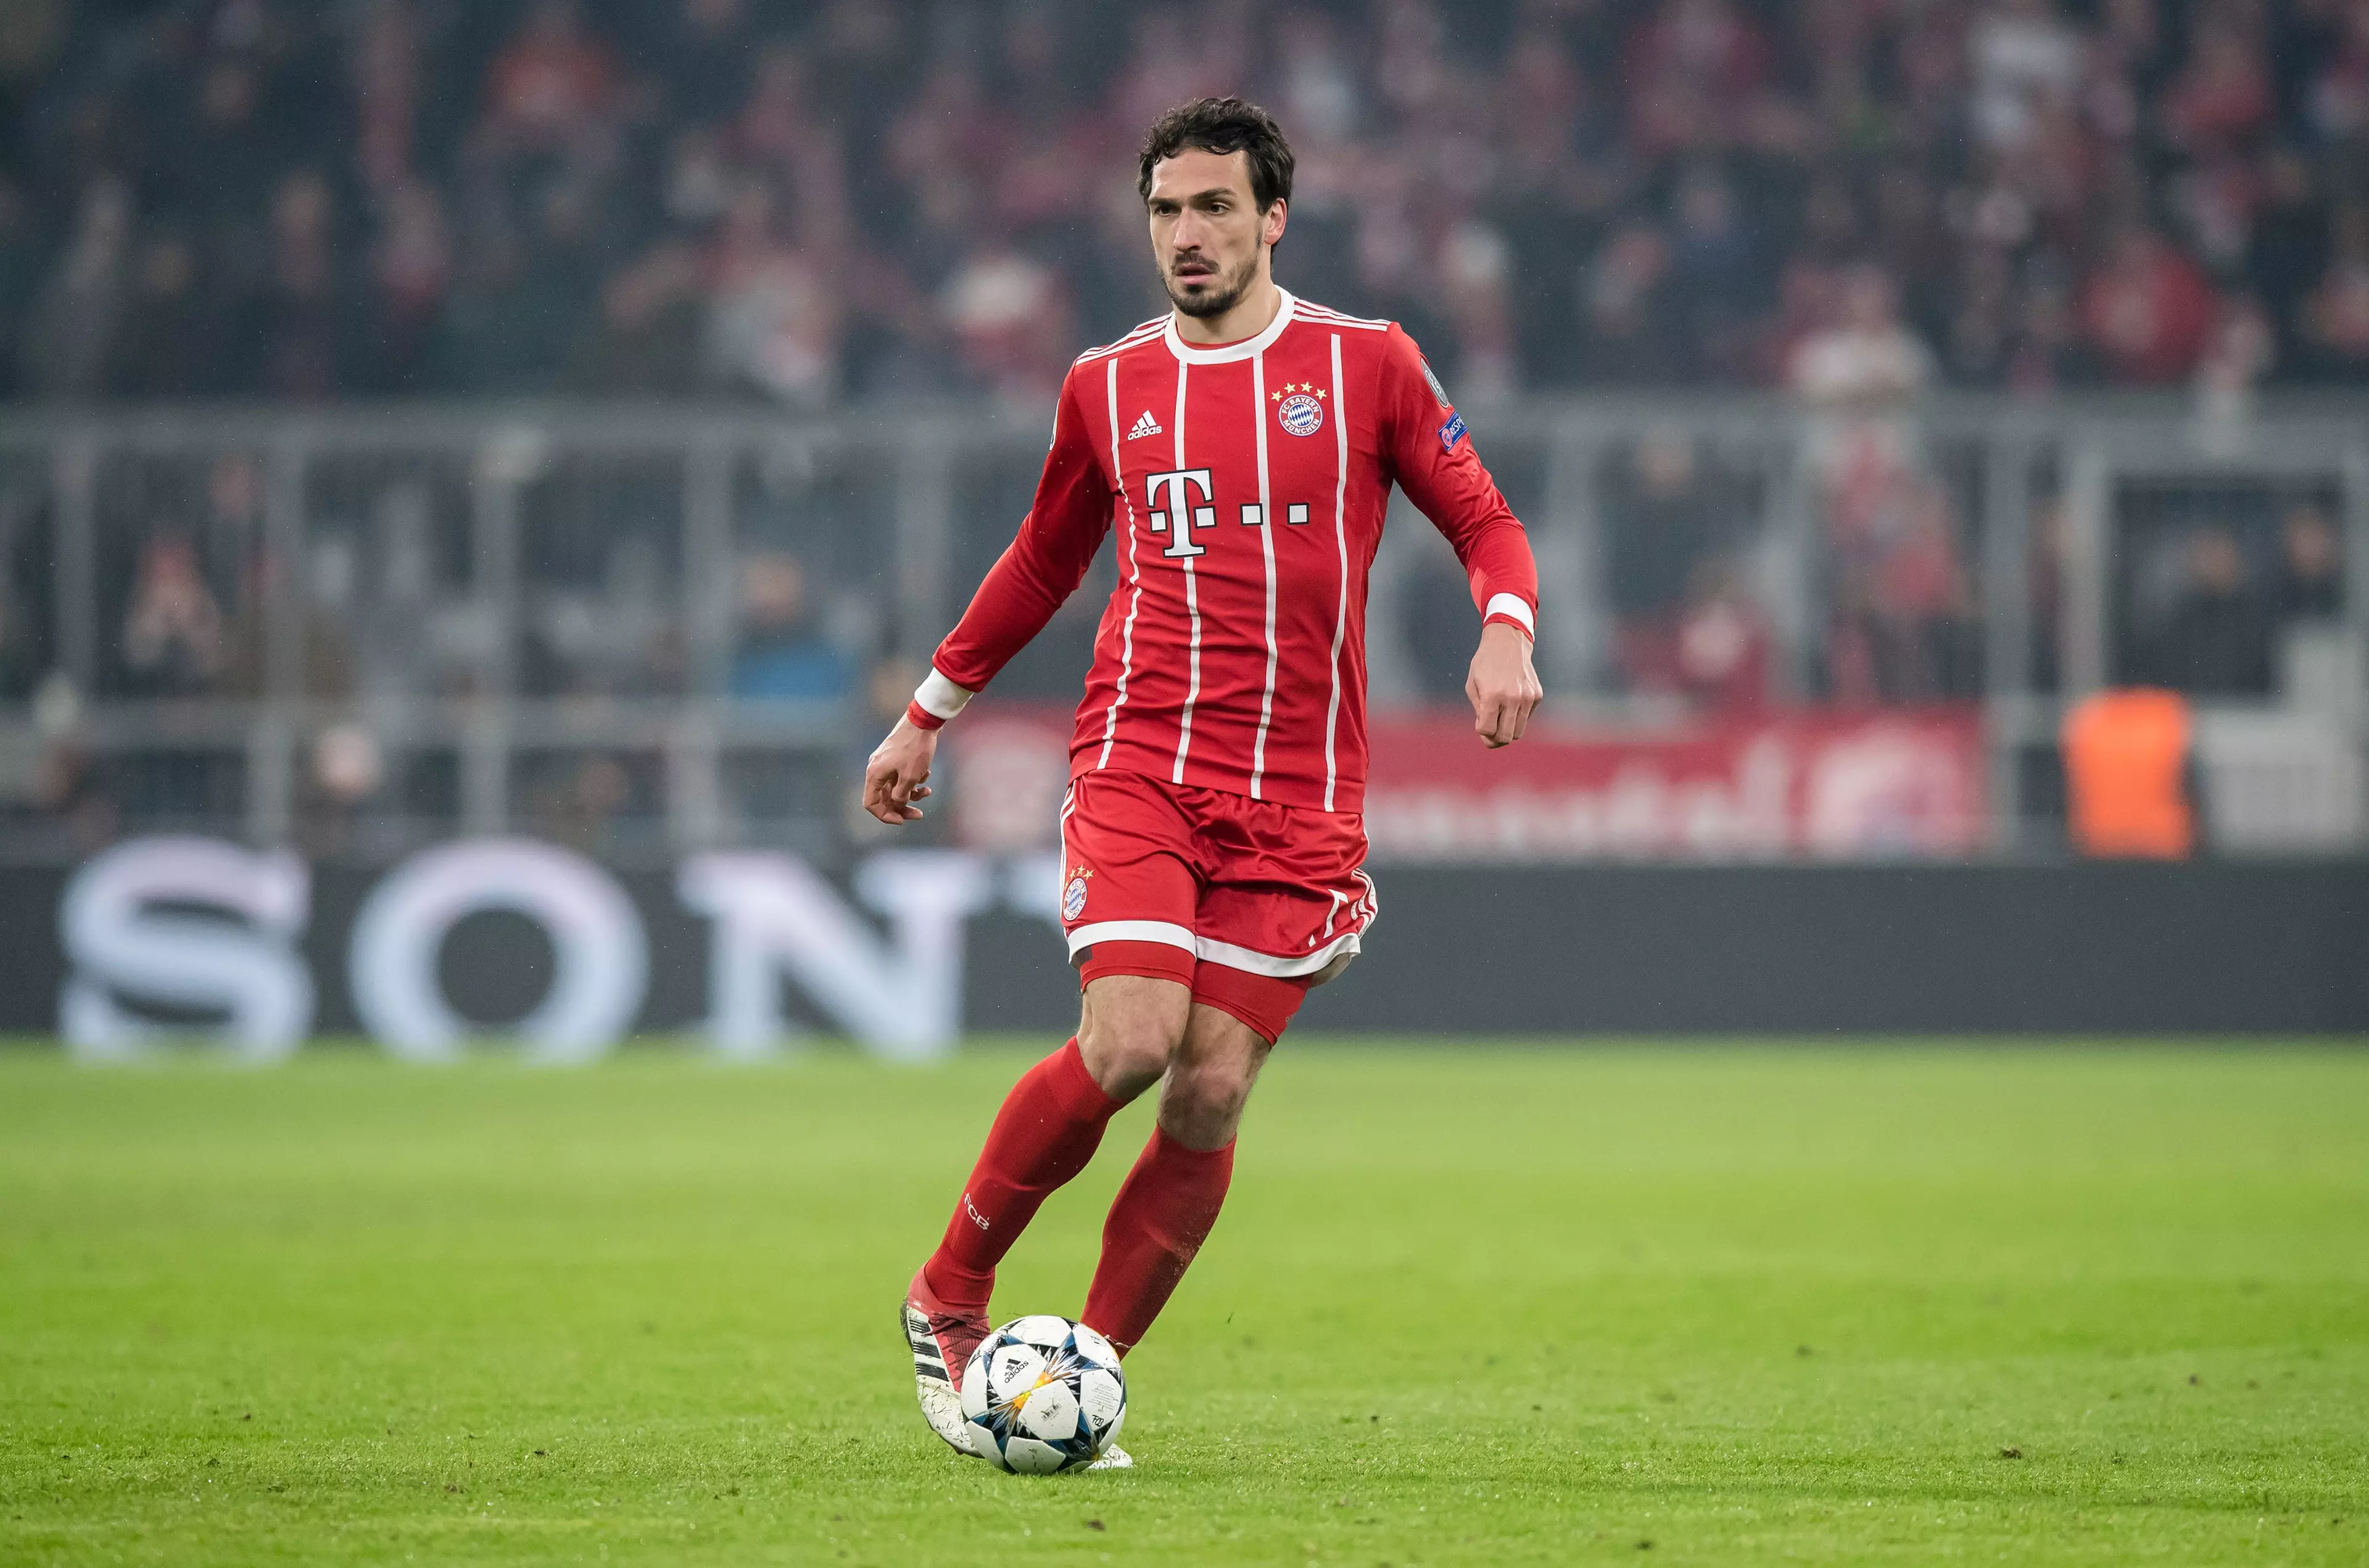 Hummels in action. Image: PA